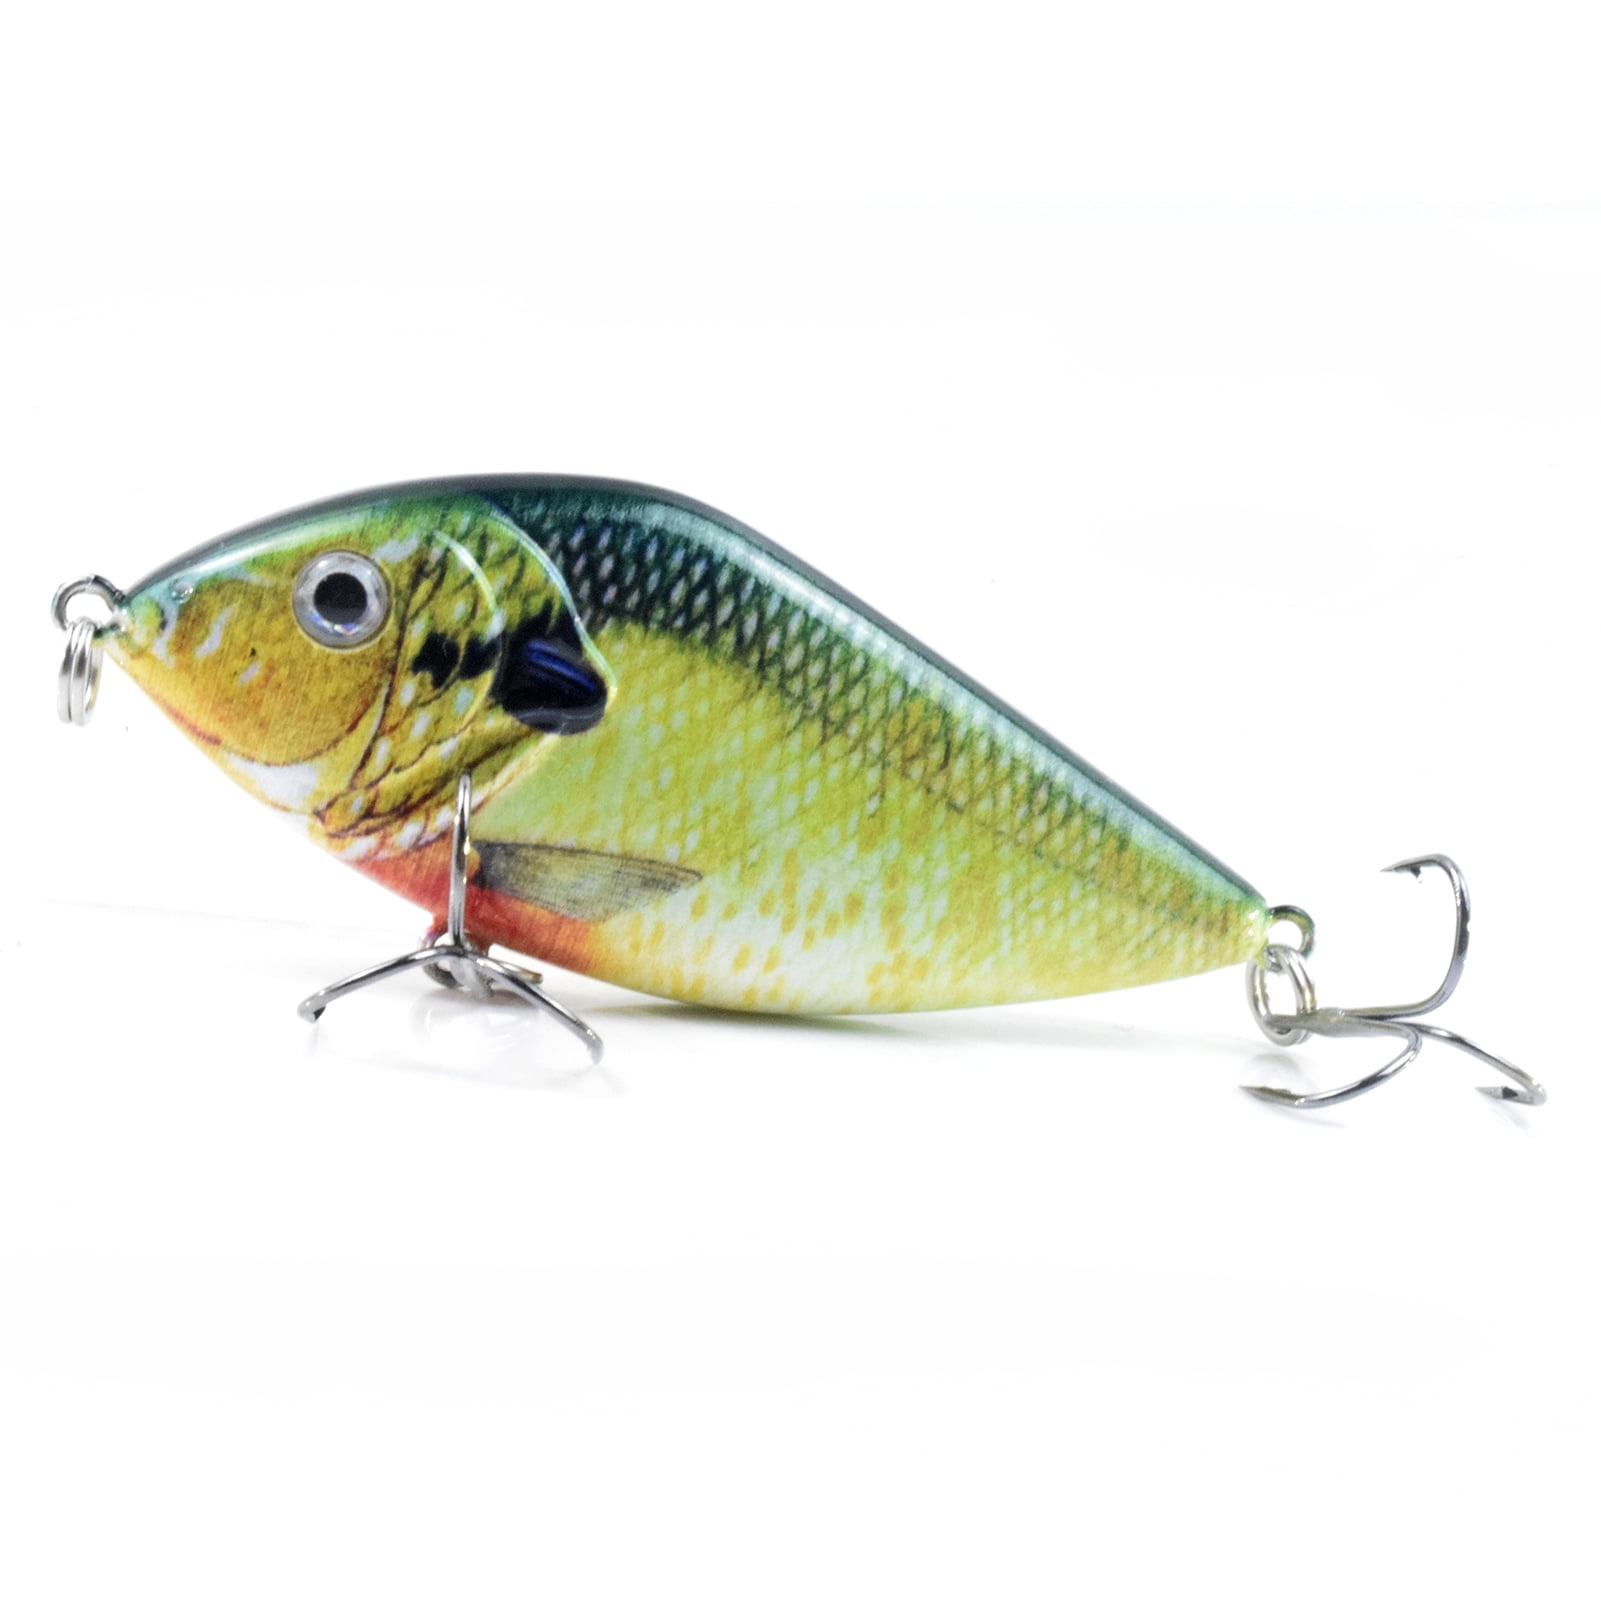 [Brand] Lifelike Artificial Sinking Crankbait Rattle Fishing Lures with  Steel Ball Inside for Bass Pike